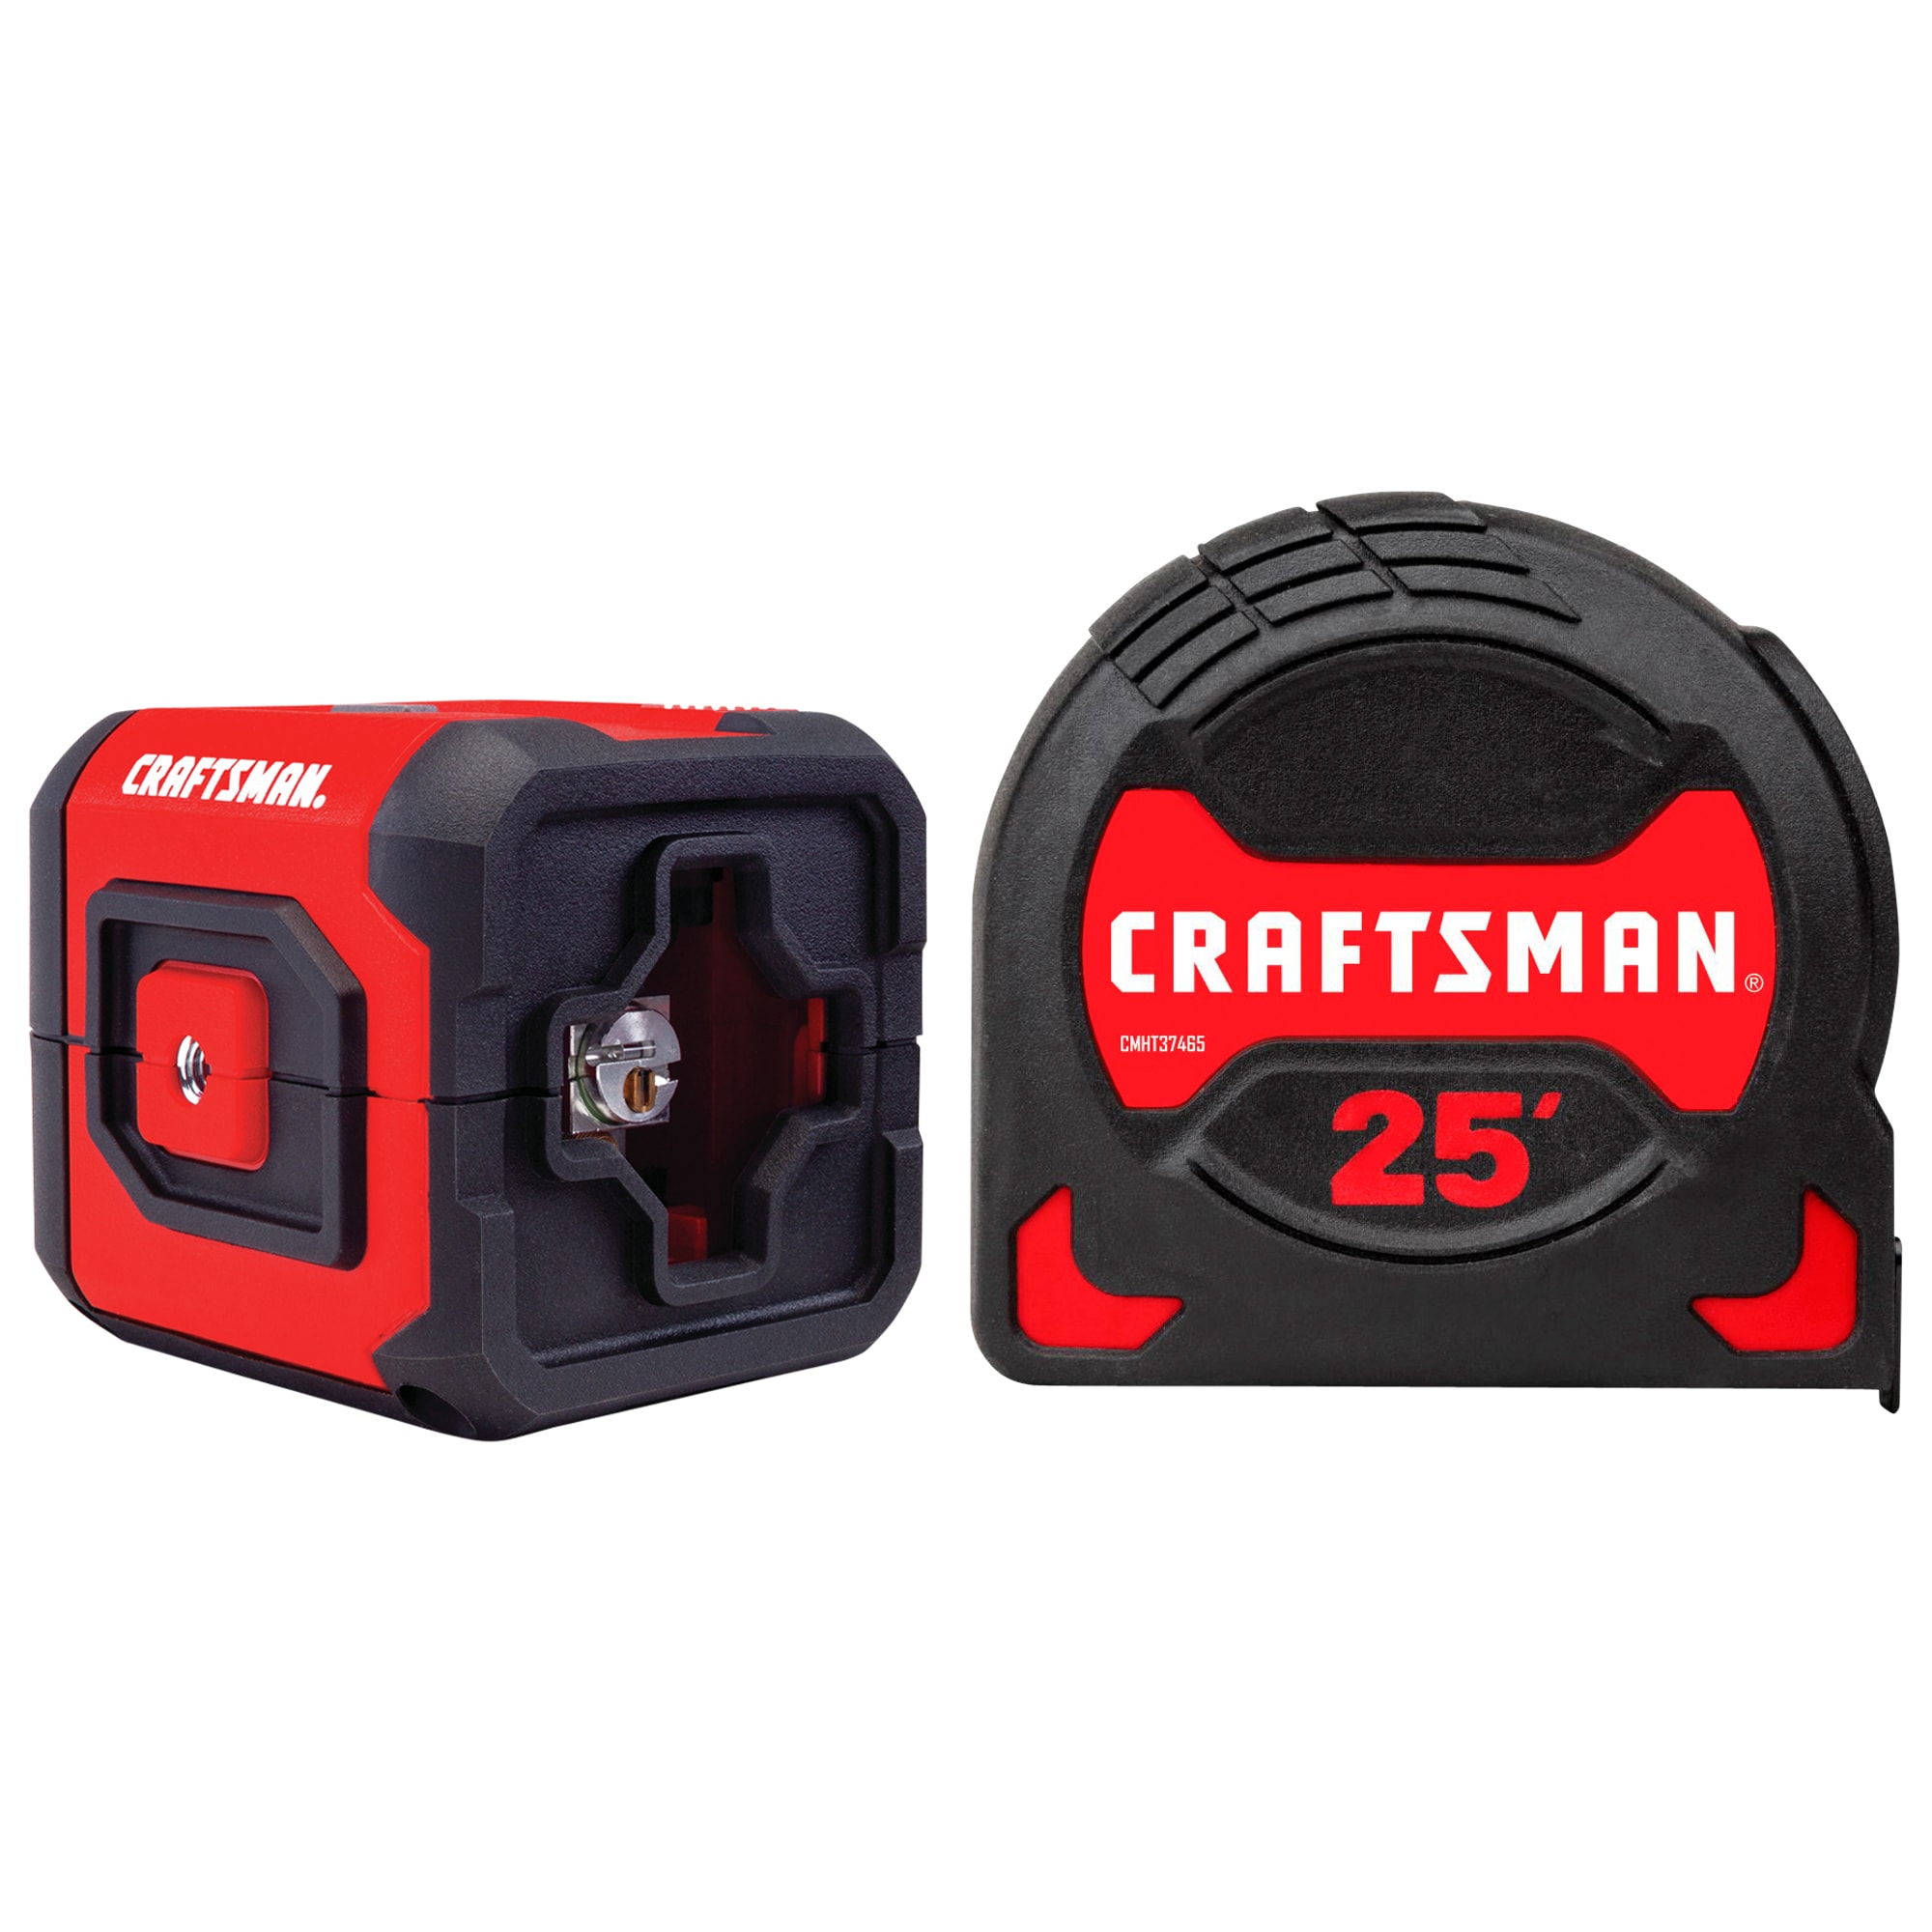 Craftsman compact easy grip. Nice little tape measure. The rubber keeps it  safe when I drop it, which is a lot.